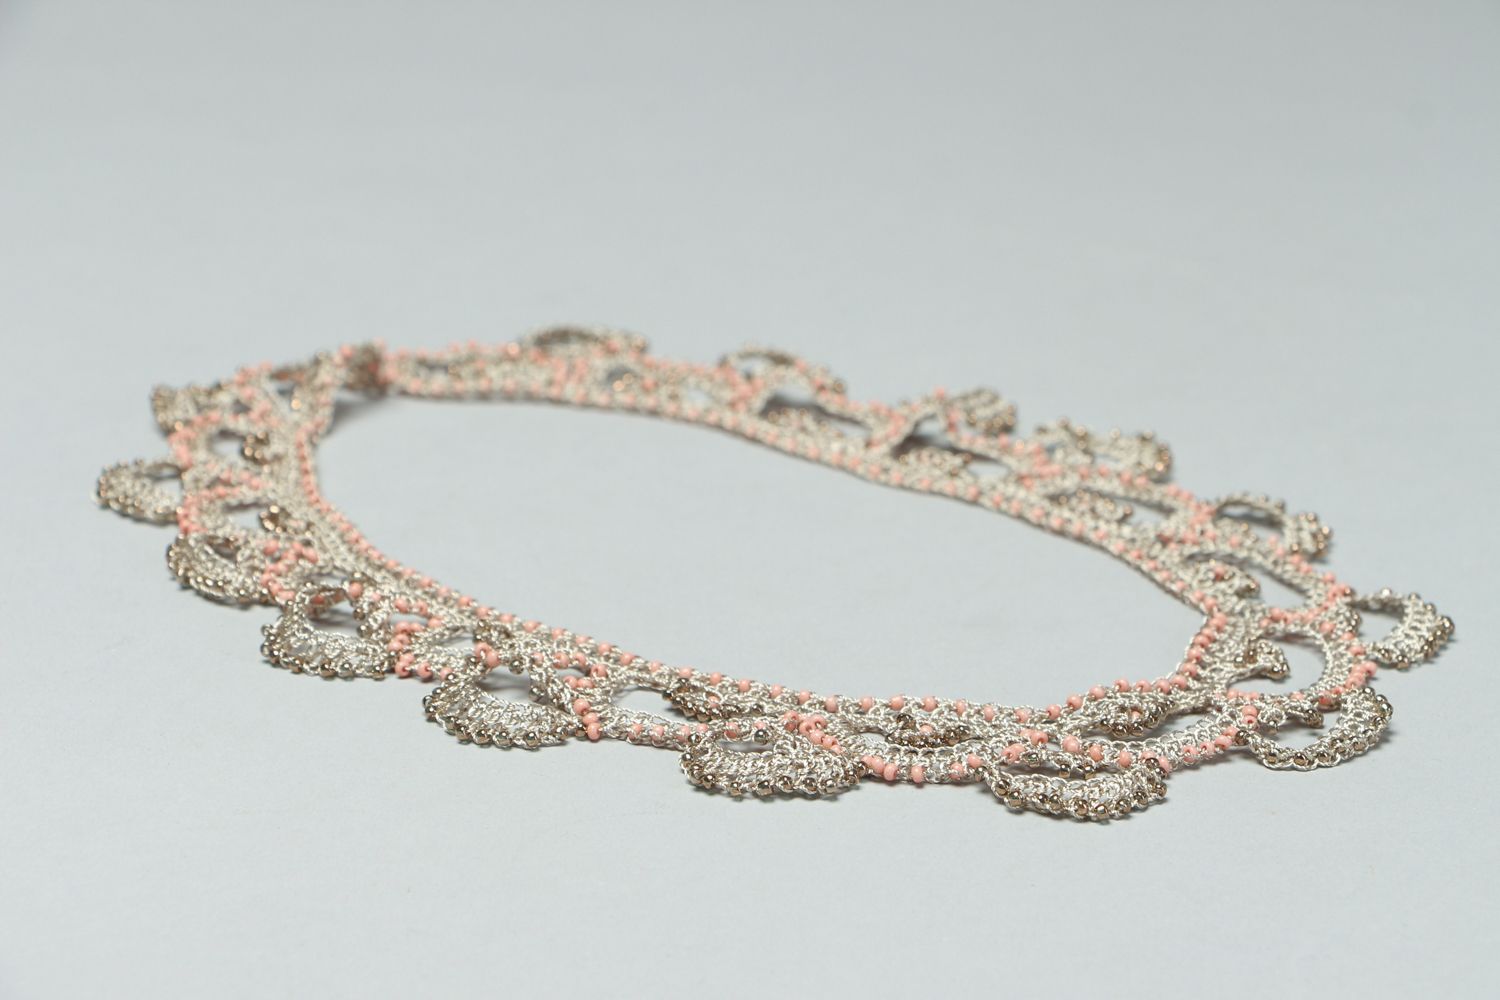 Lacy crochet necklace with beads photo 3